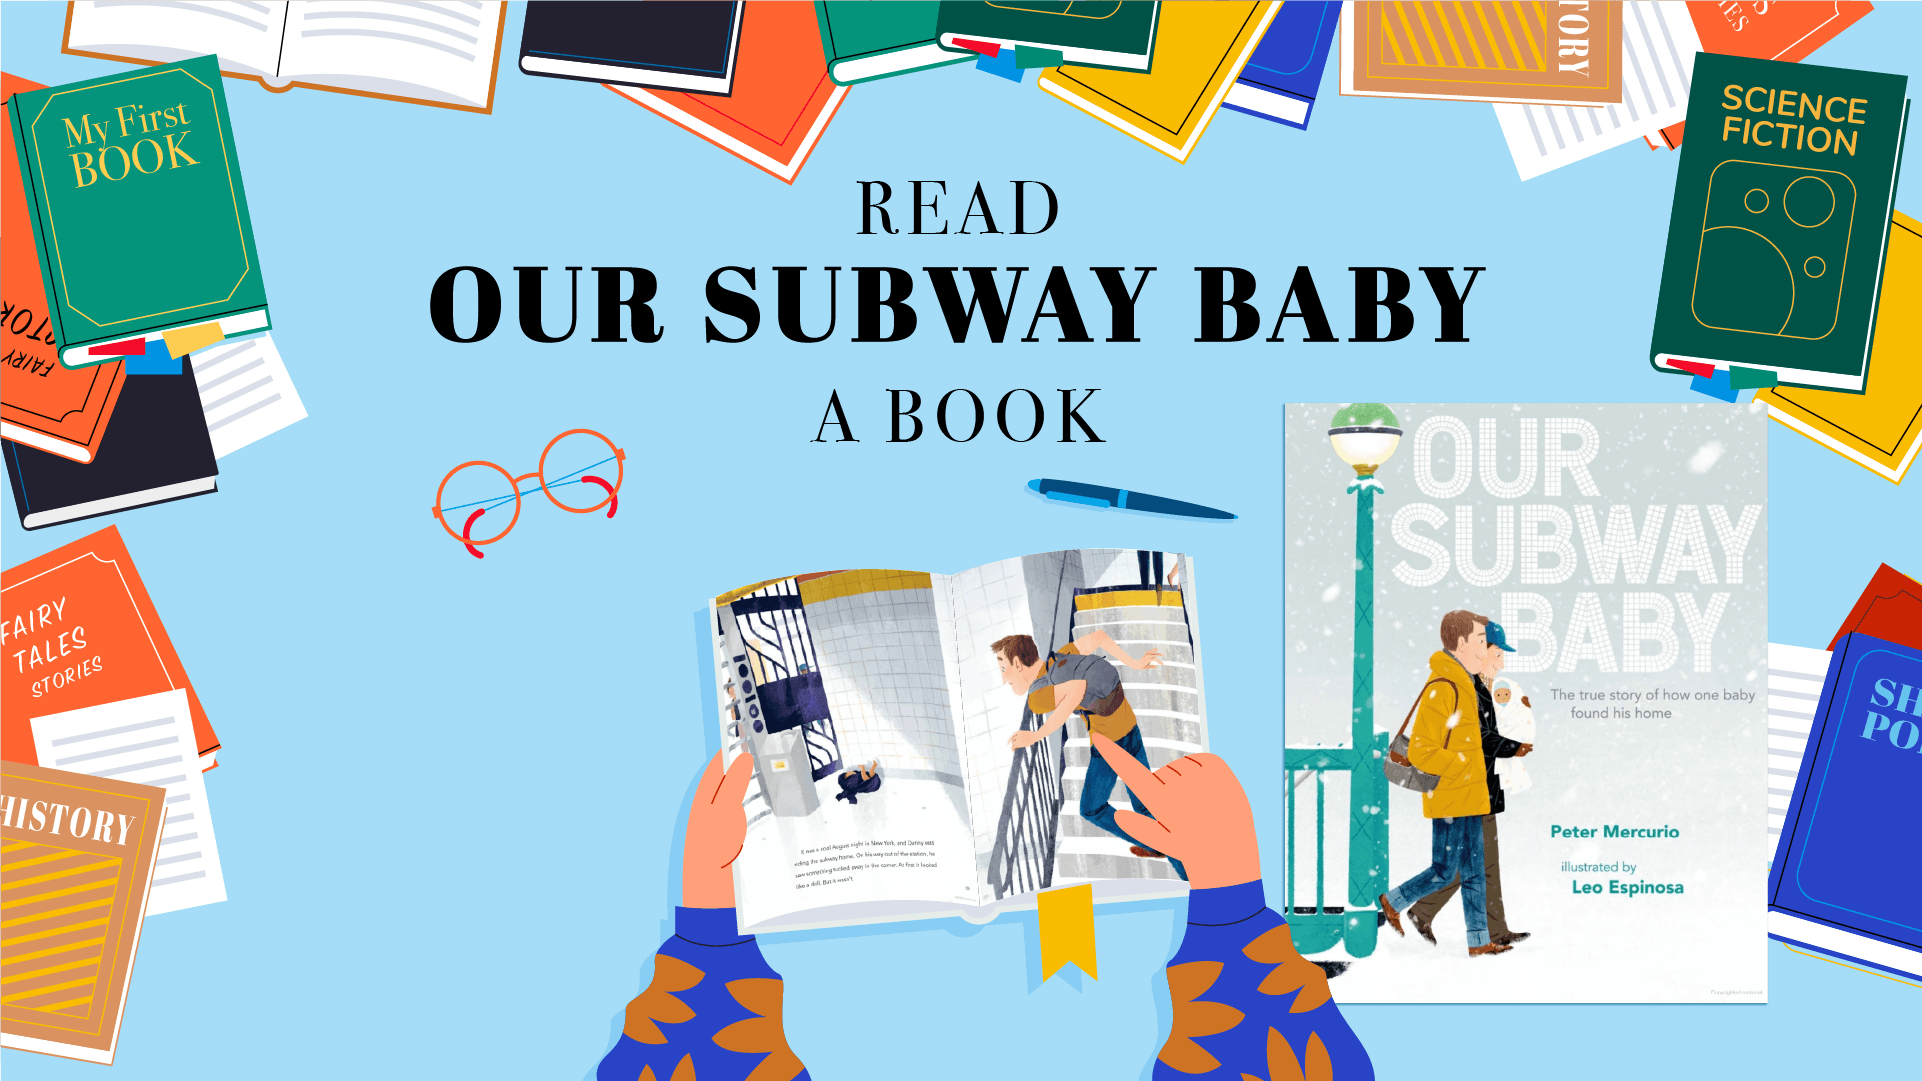 Books border, headline- first line: READ second line: "Our Subway Baby" third line: A BOOK graphics of orange glasses, blue pen, a person opening a book and point at the two spread pages from "Our Subway Baby". The cover of "Our Subway Baby" on right side.